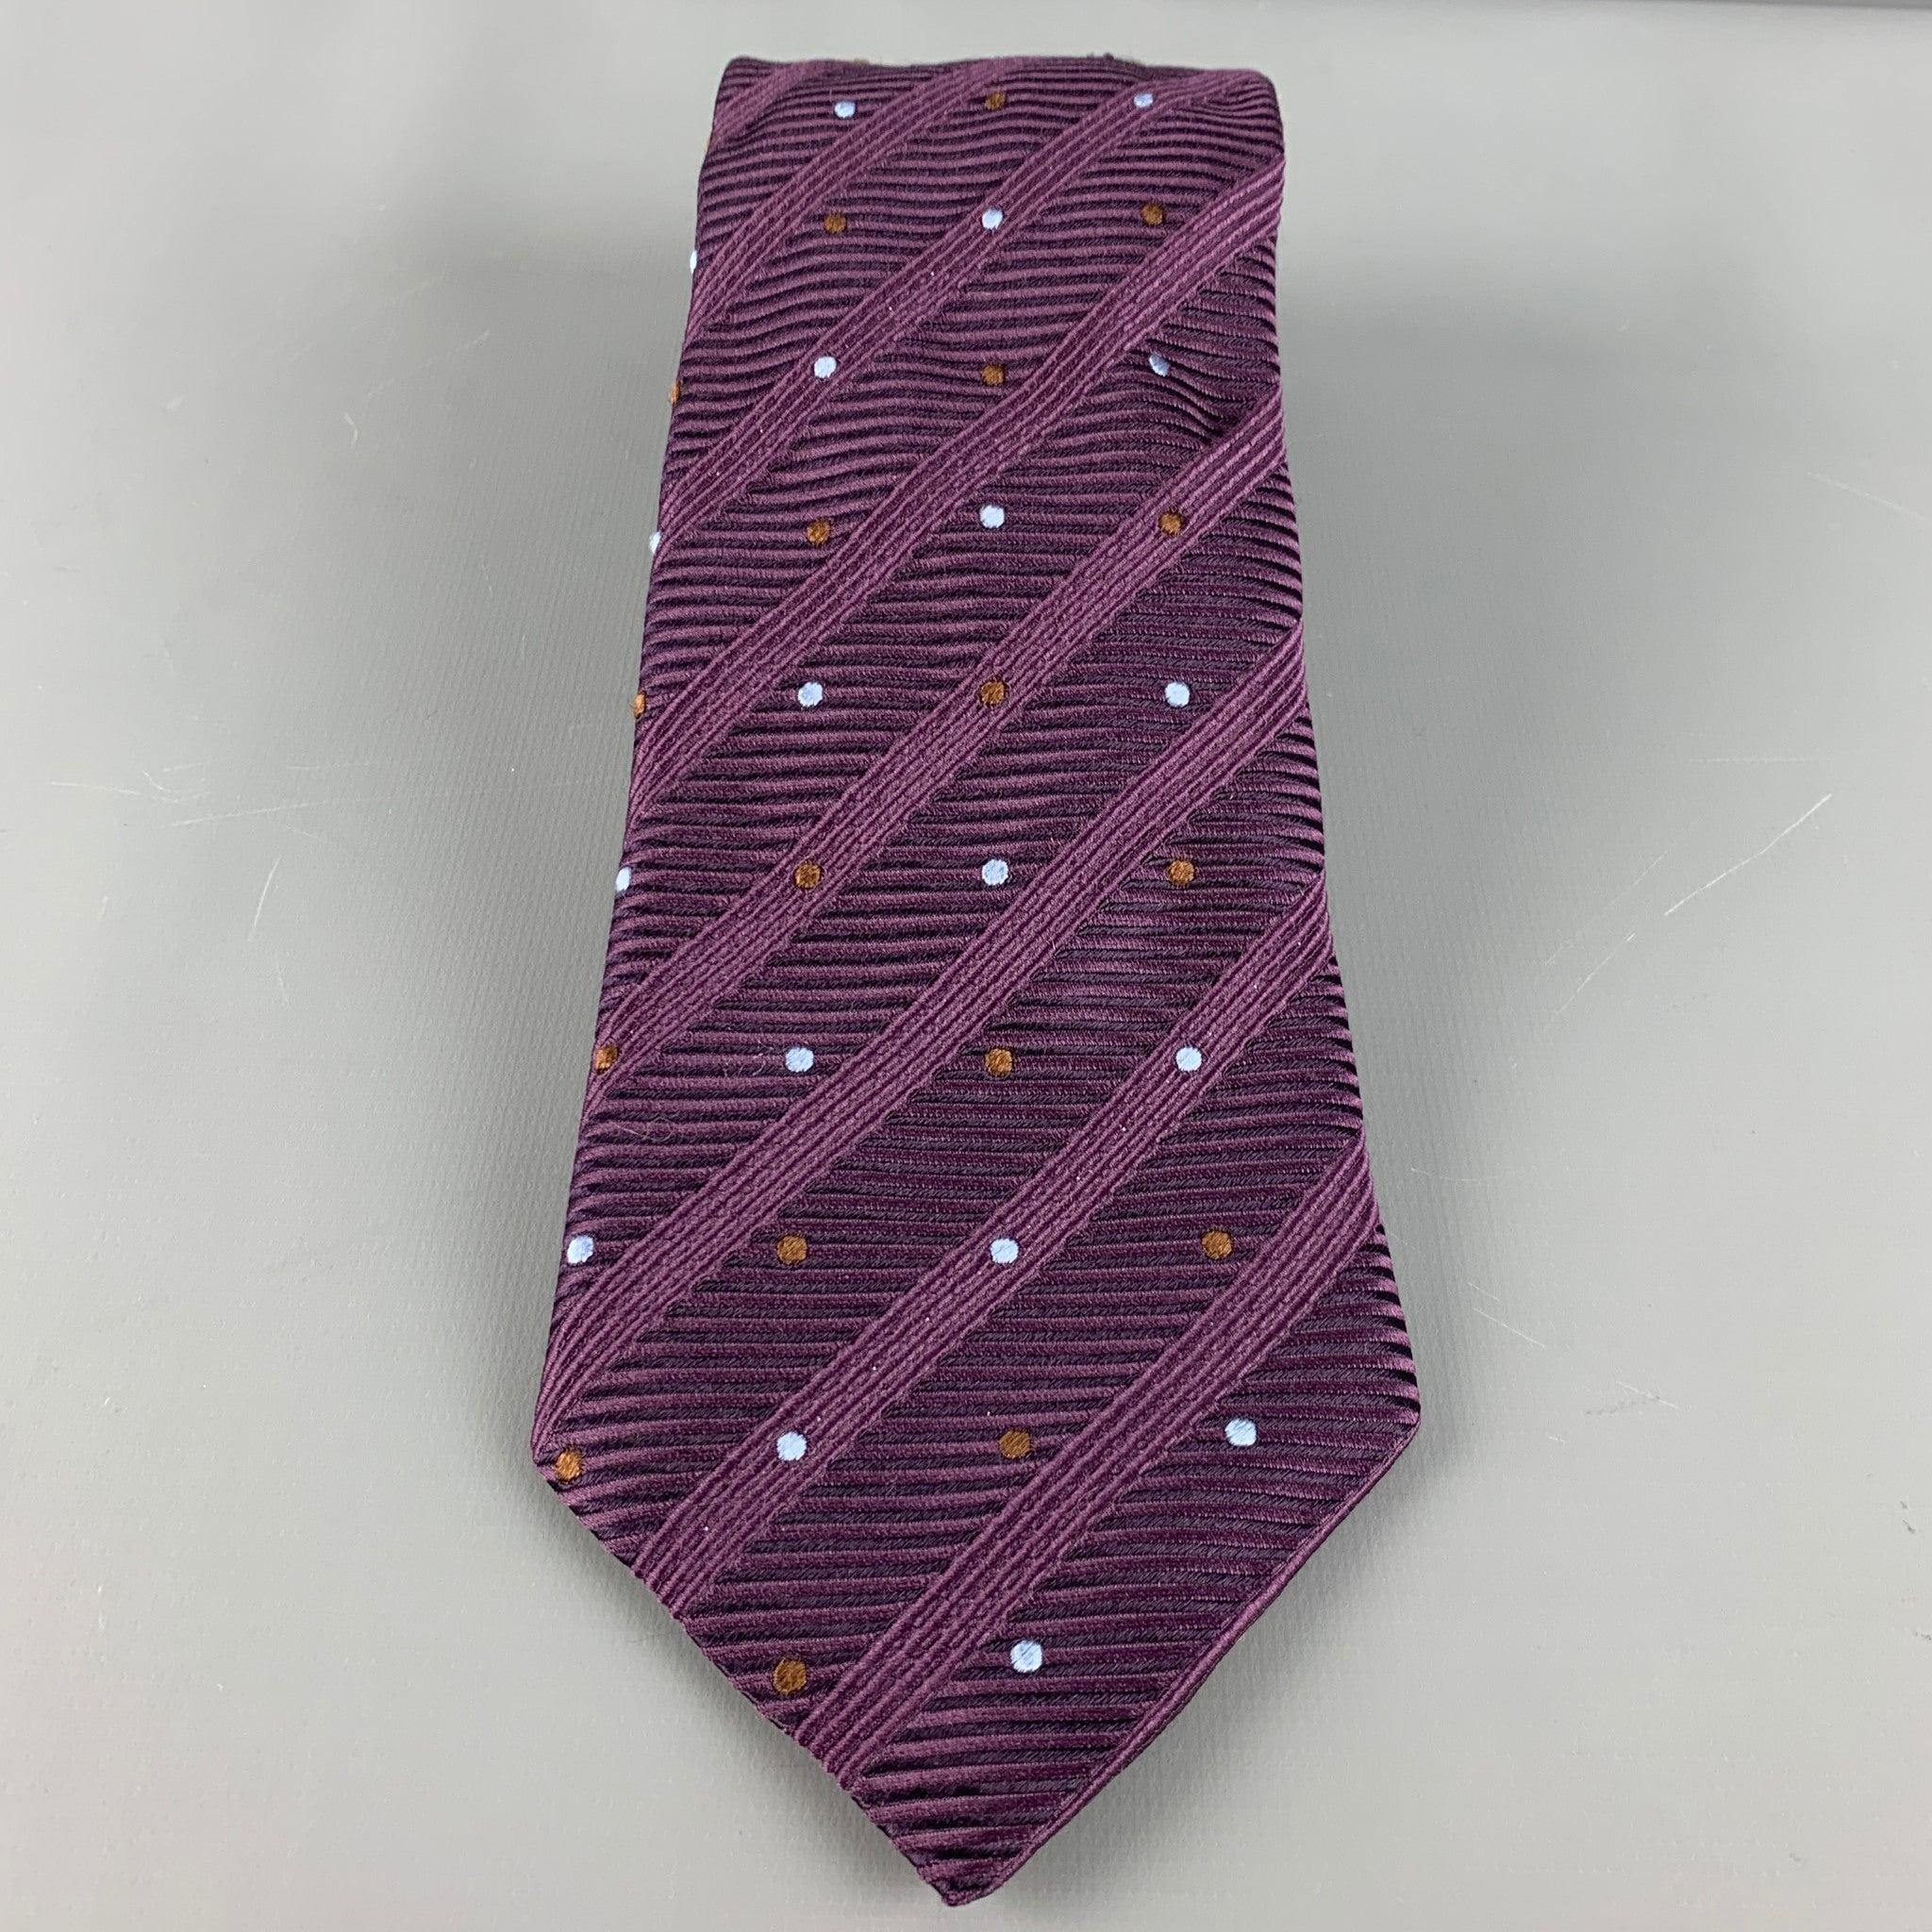 CANALI tie in 100% silk, featuring a purple contrasting ribbed stripe pattern with blue and brown dots. Made in Italy.Very Good Pre-Owned Condition. 

Measurements: 
  Width: 4 inches Length: 60.5 inches 
  
  
 
Reference: 126583
Category: Tie
More